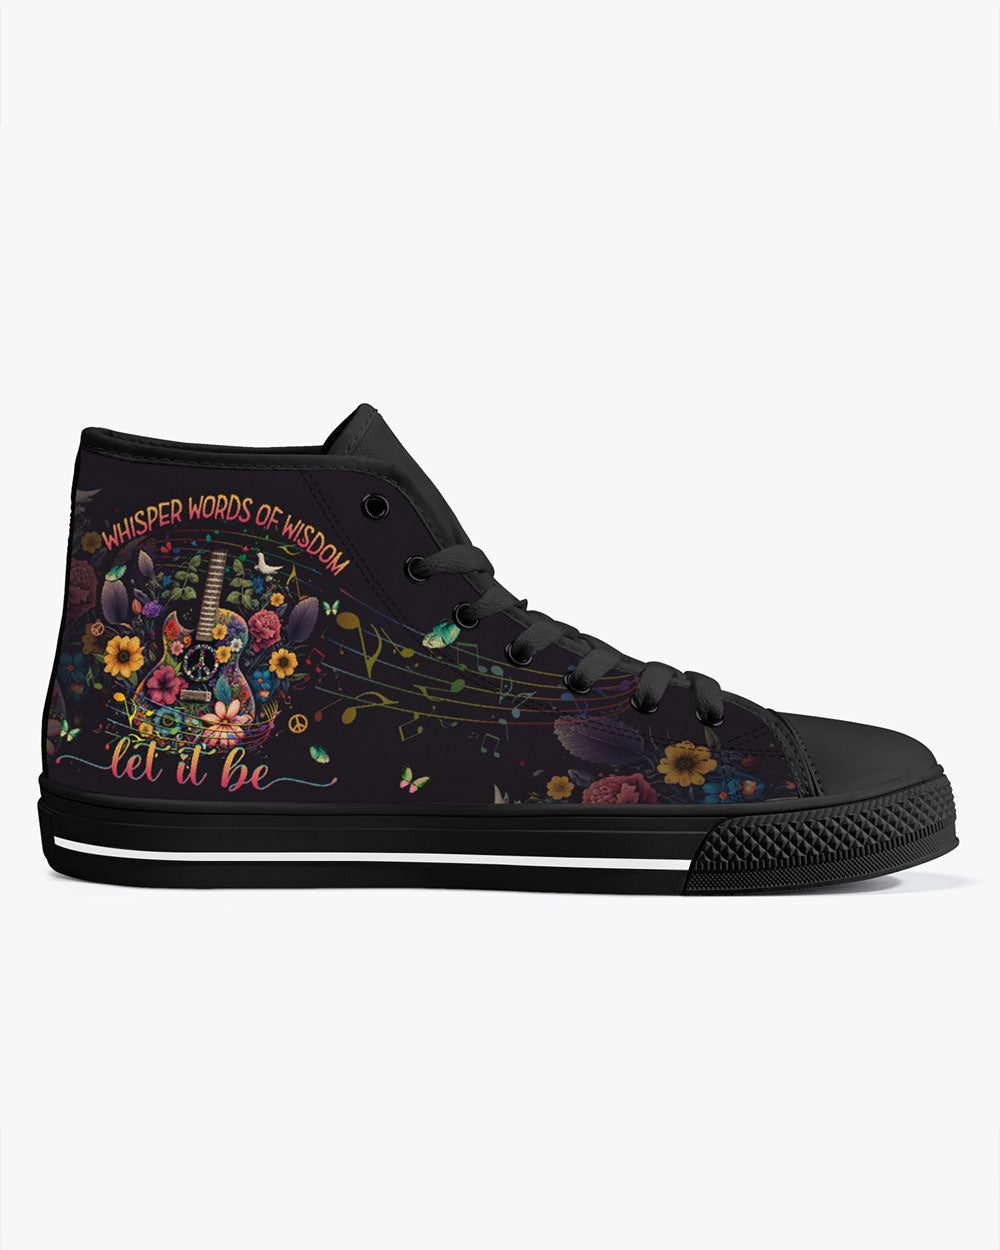 WHISPER WORDS OF WISDOM GUITAR HIPPIE HIGH TOP CANVAS SHOES - YHHG0603235